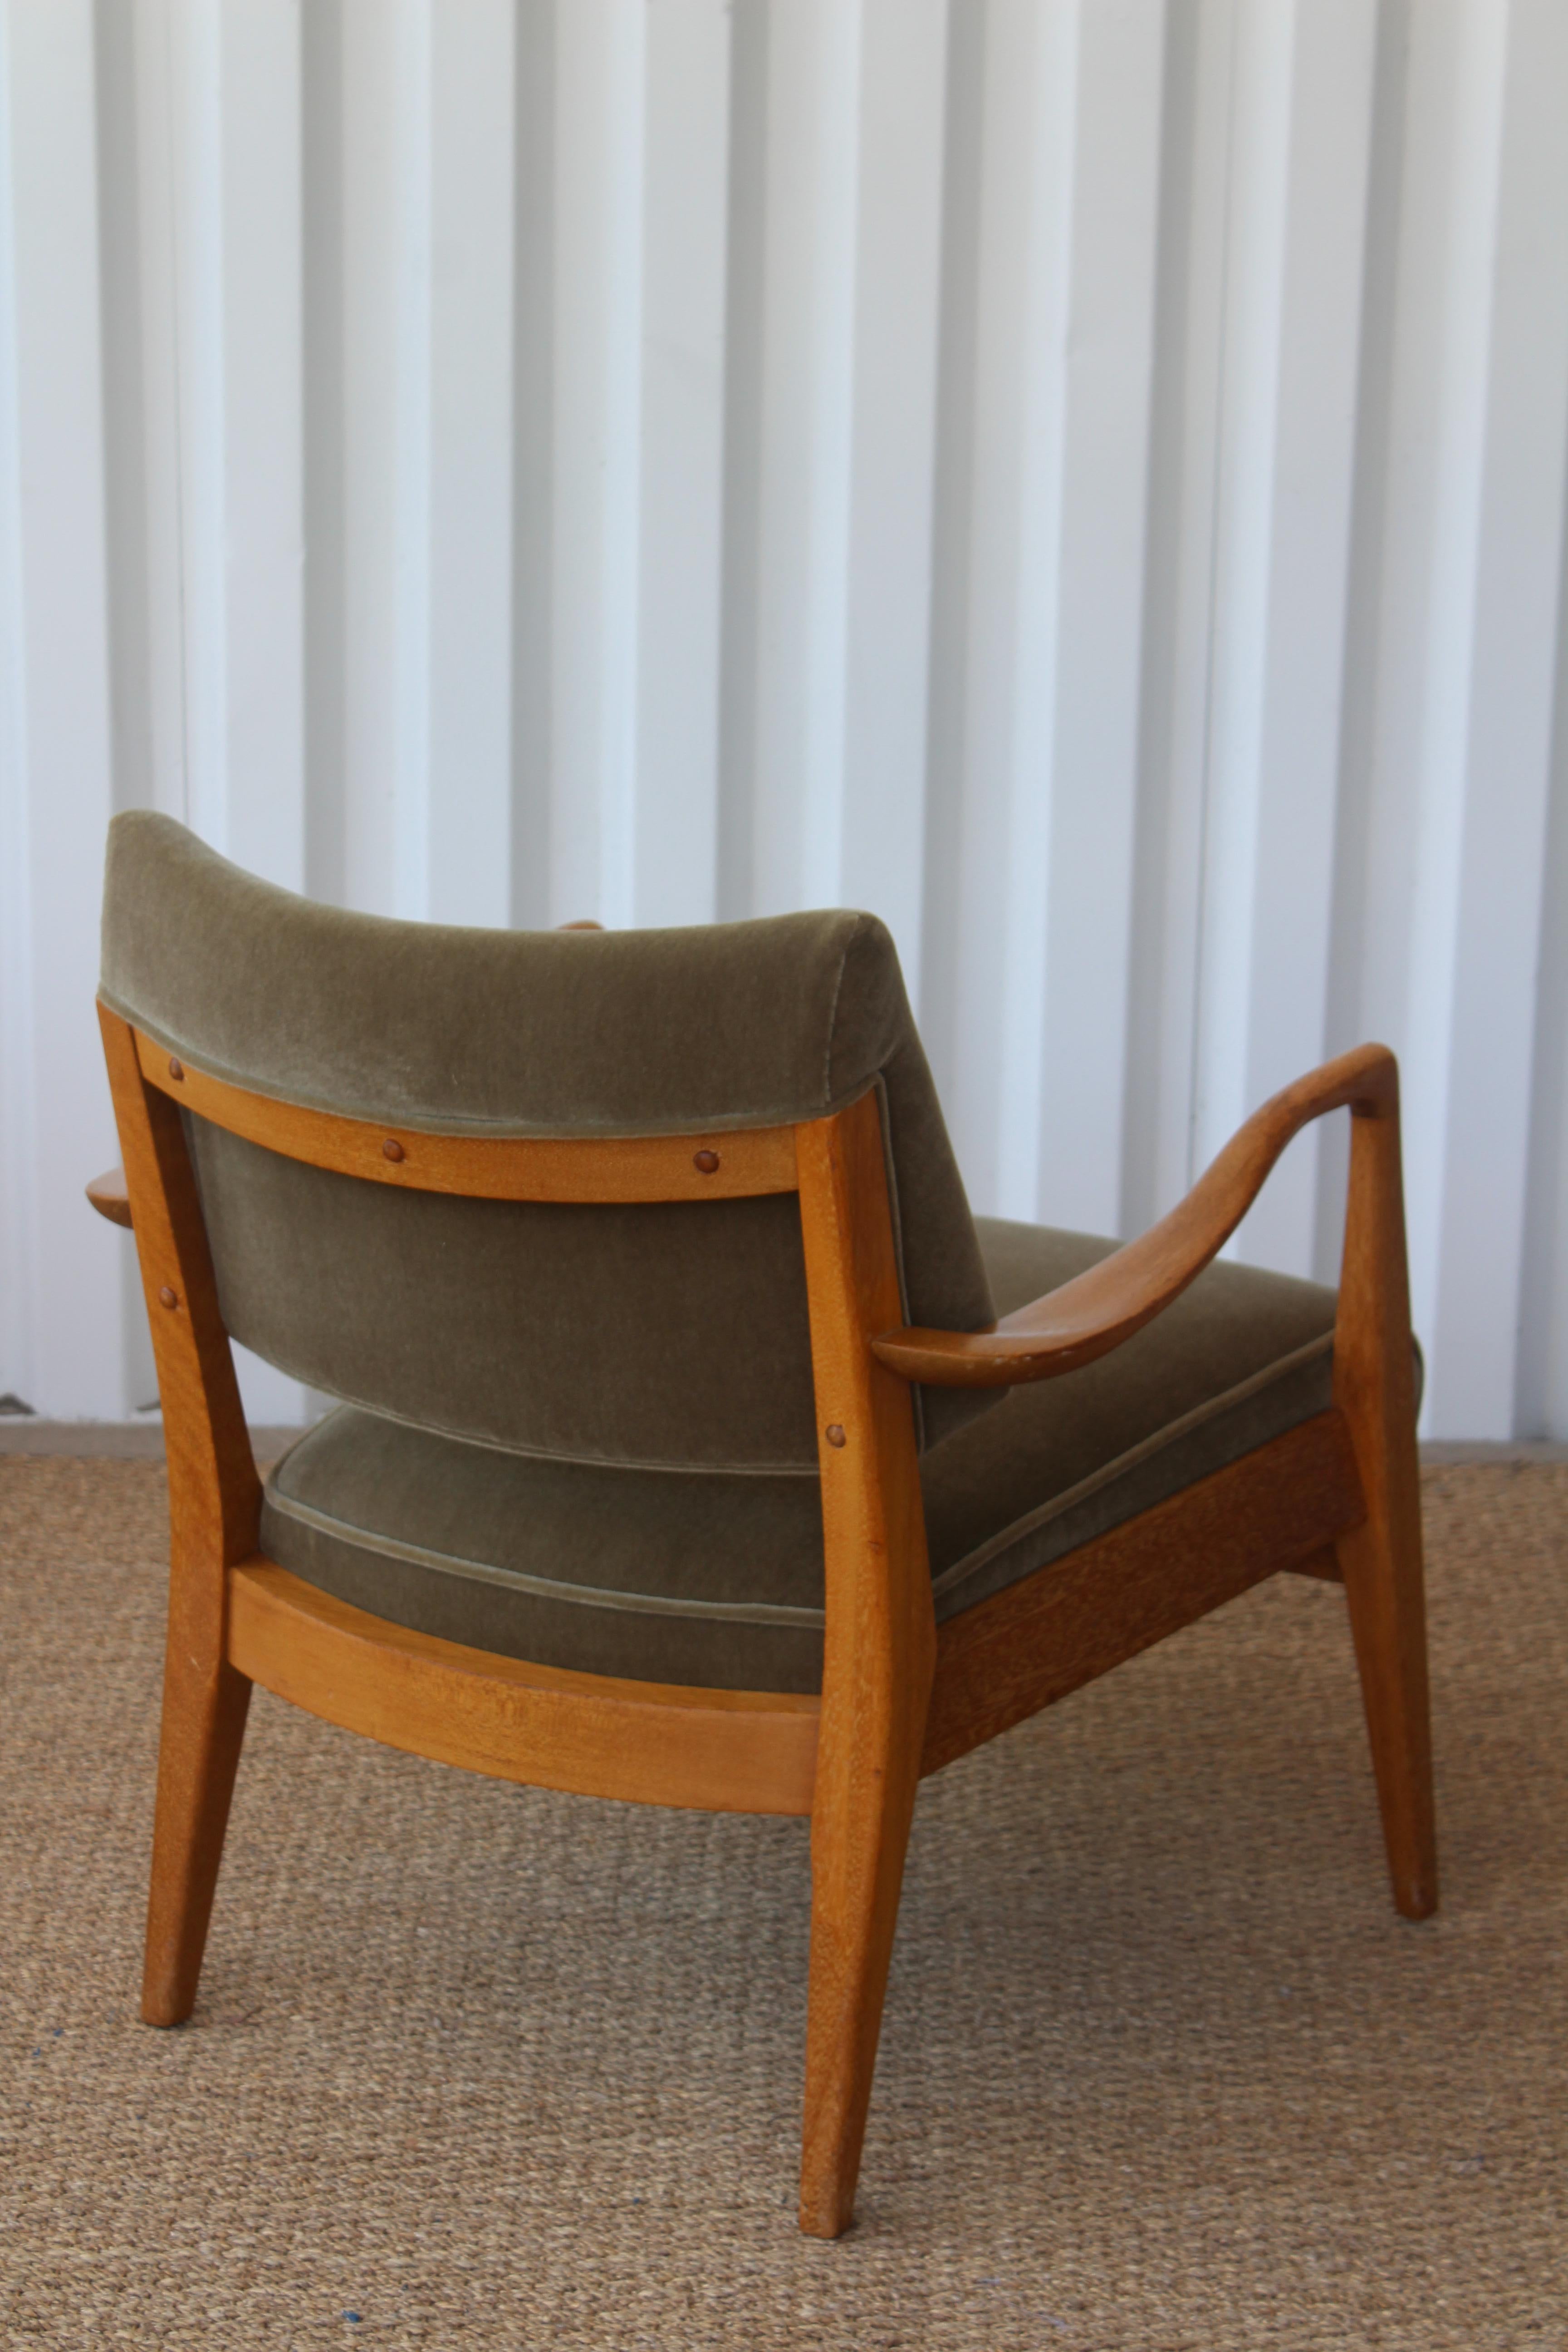 Cerused Lounge Chair Designed by Paul Laszlo for Brown Saltman, U.S.A, 1950s